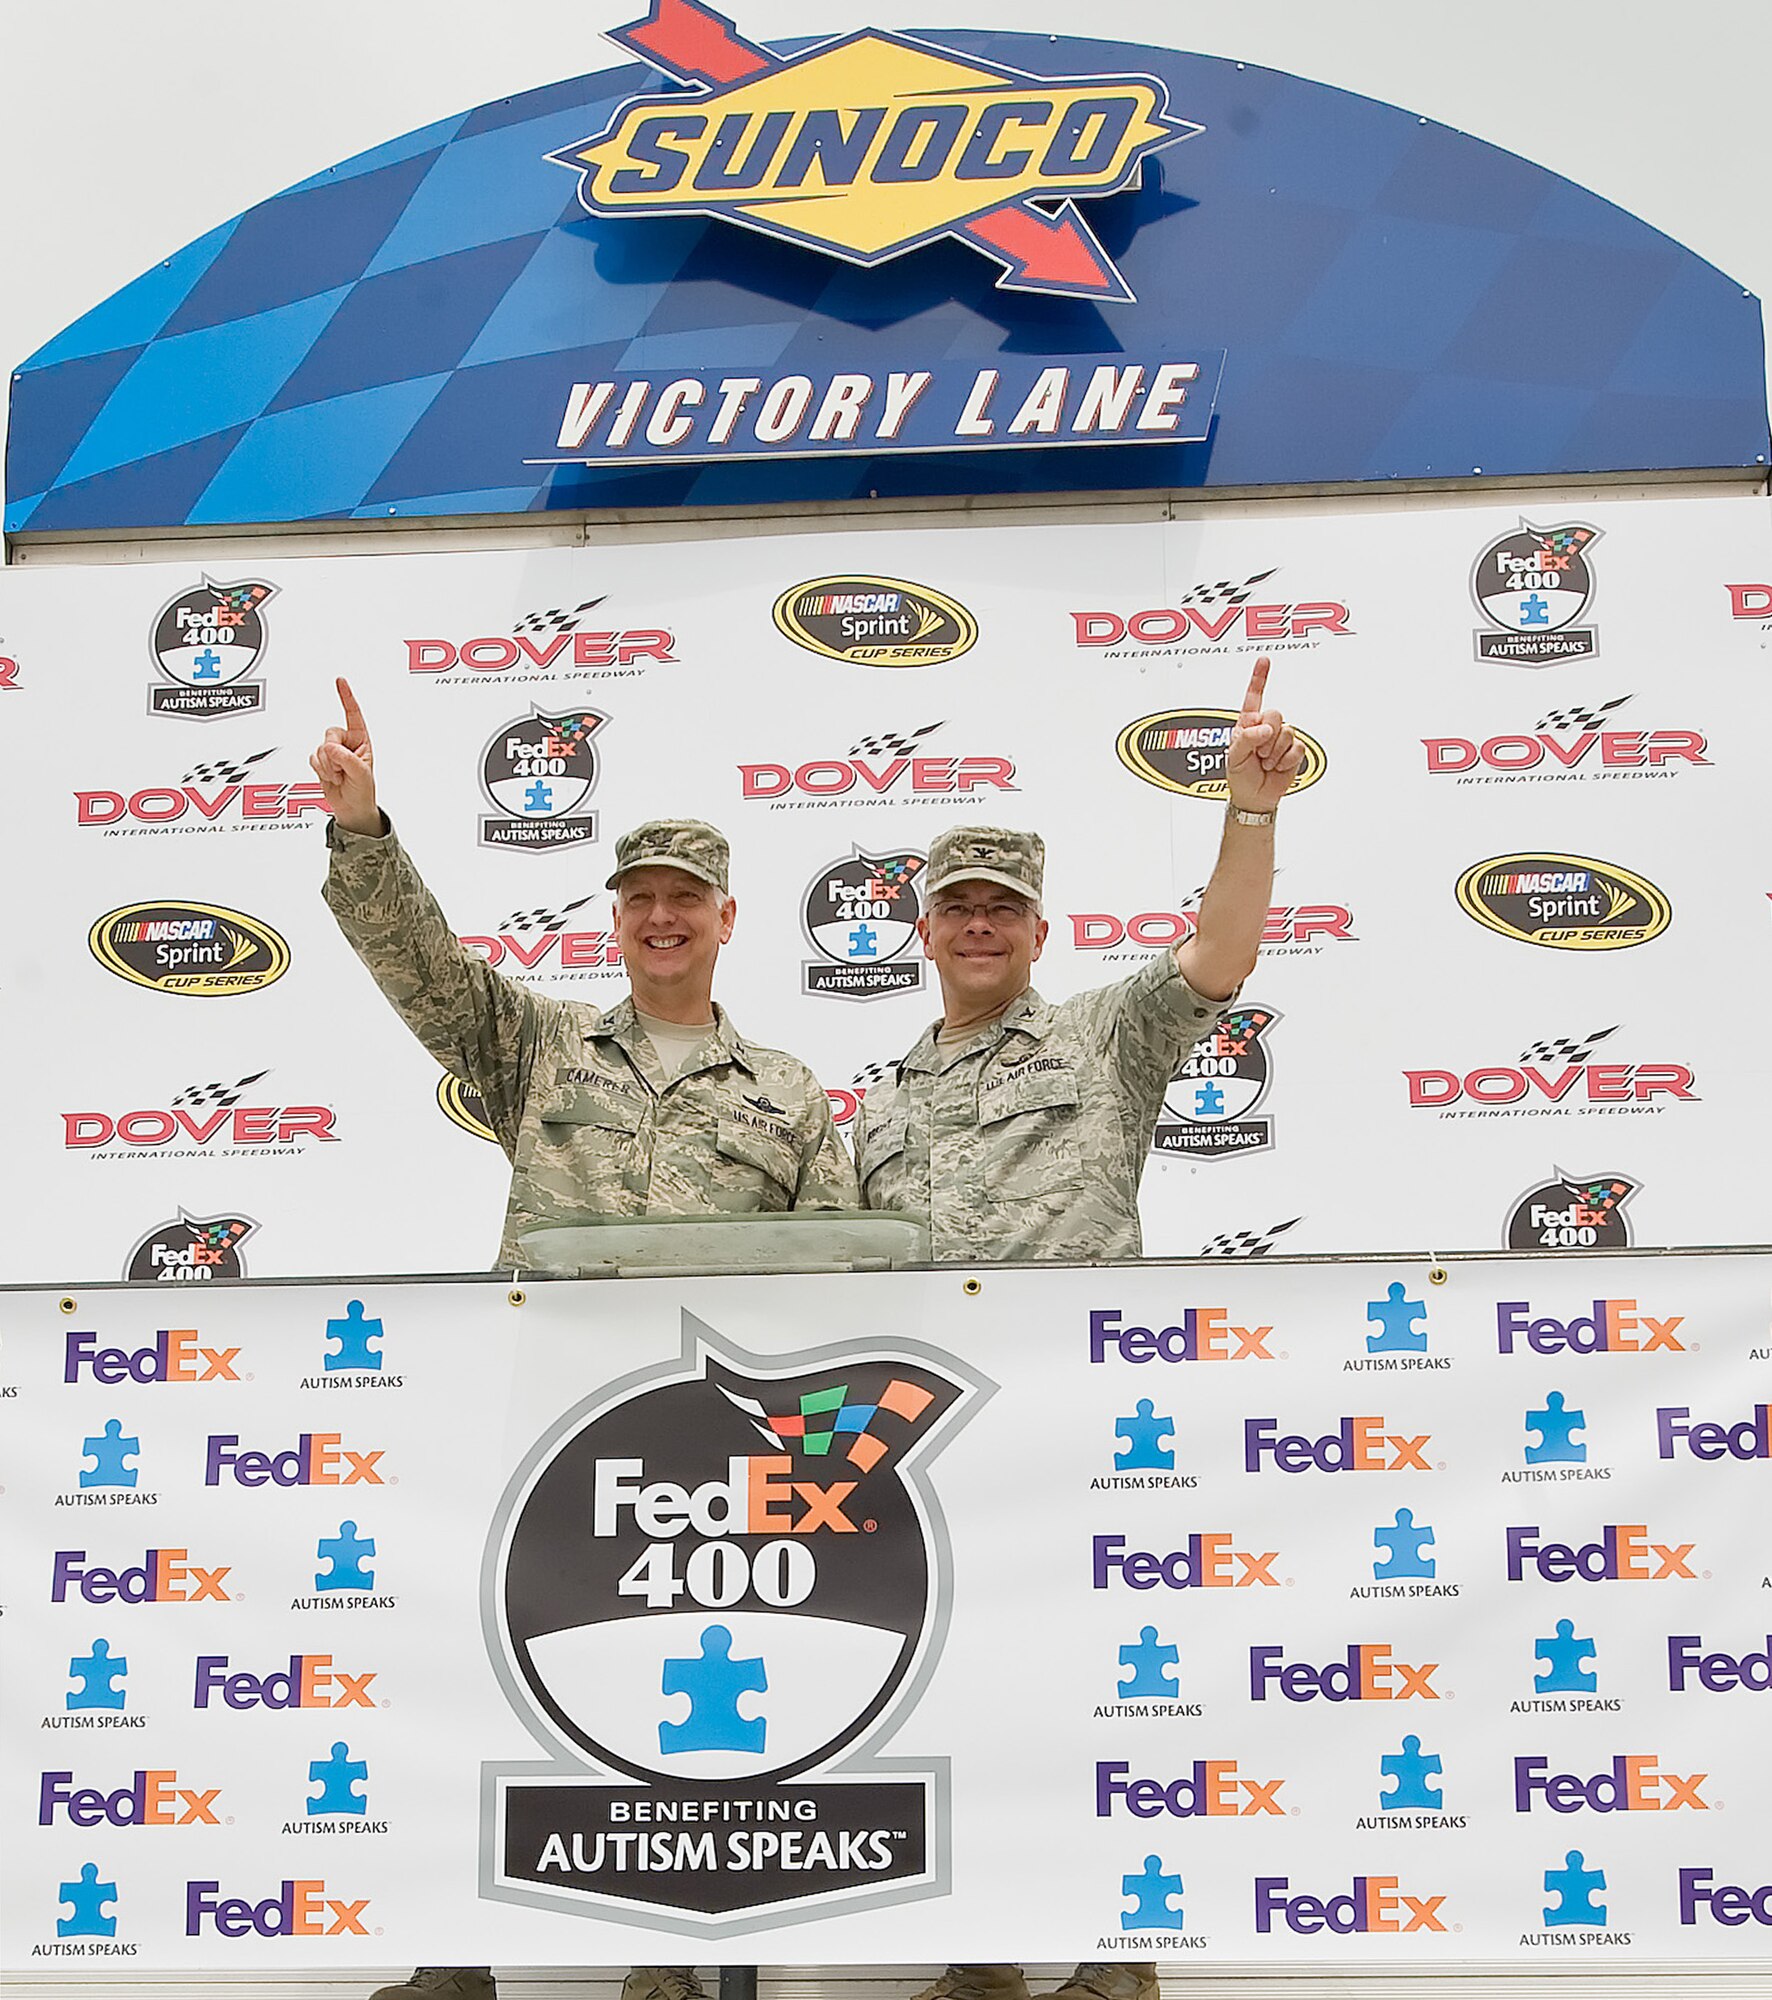 Col. Mark Camerer (left), 436th Airlift Wing commander, and Col. Randal Bright, 512th Airlift Wing commander, pose at the podium in Victory Lane May 15, 2011, at Dover International Speedway, Del. The Colonels were among the servicemembers able to enjoy NASCAR at the infield. (U.S. Air Force photo by Airman 1st Class Jacob Morgan)